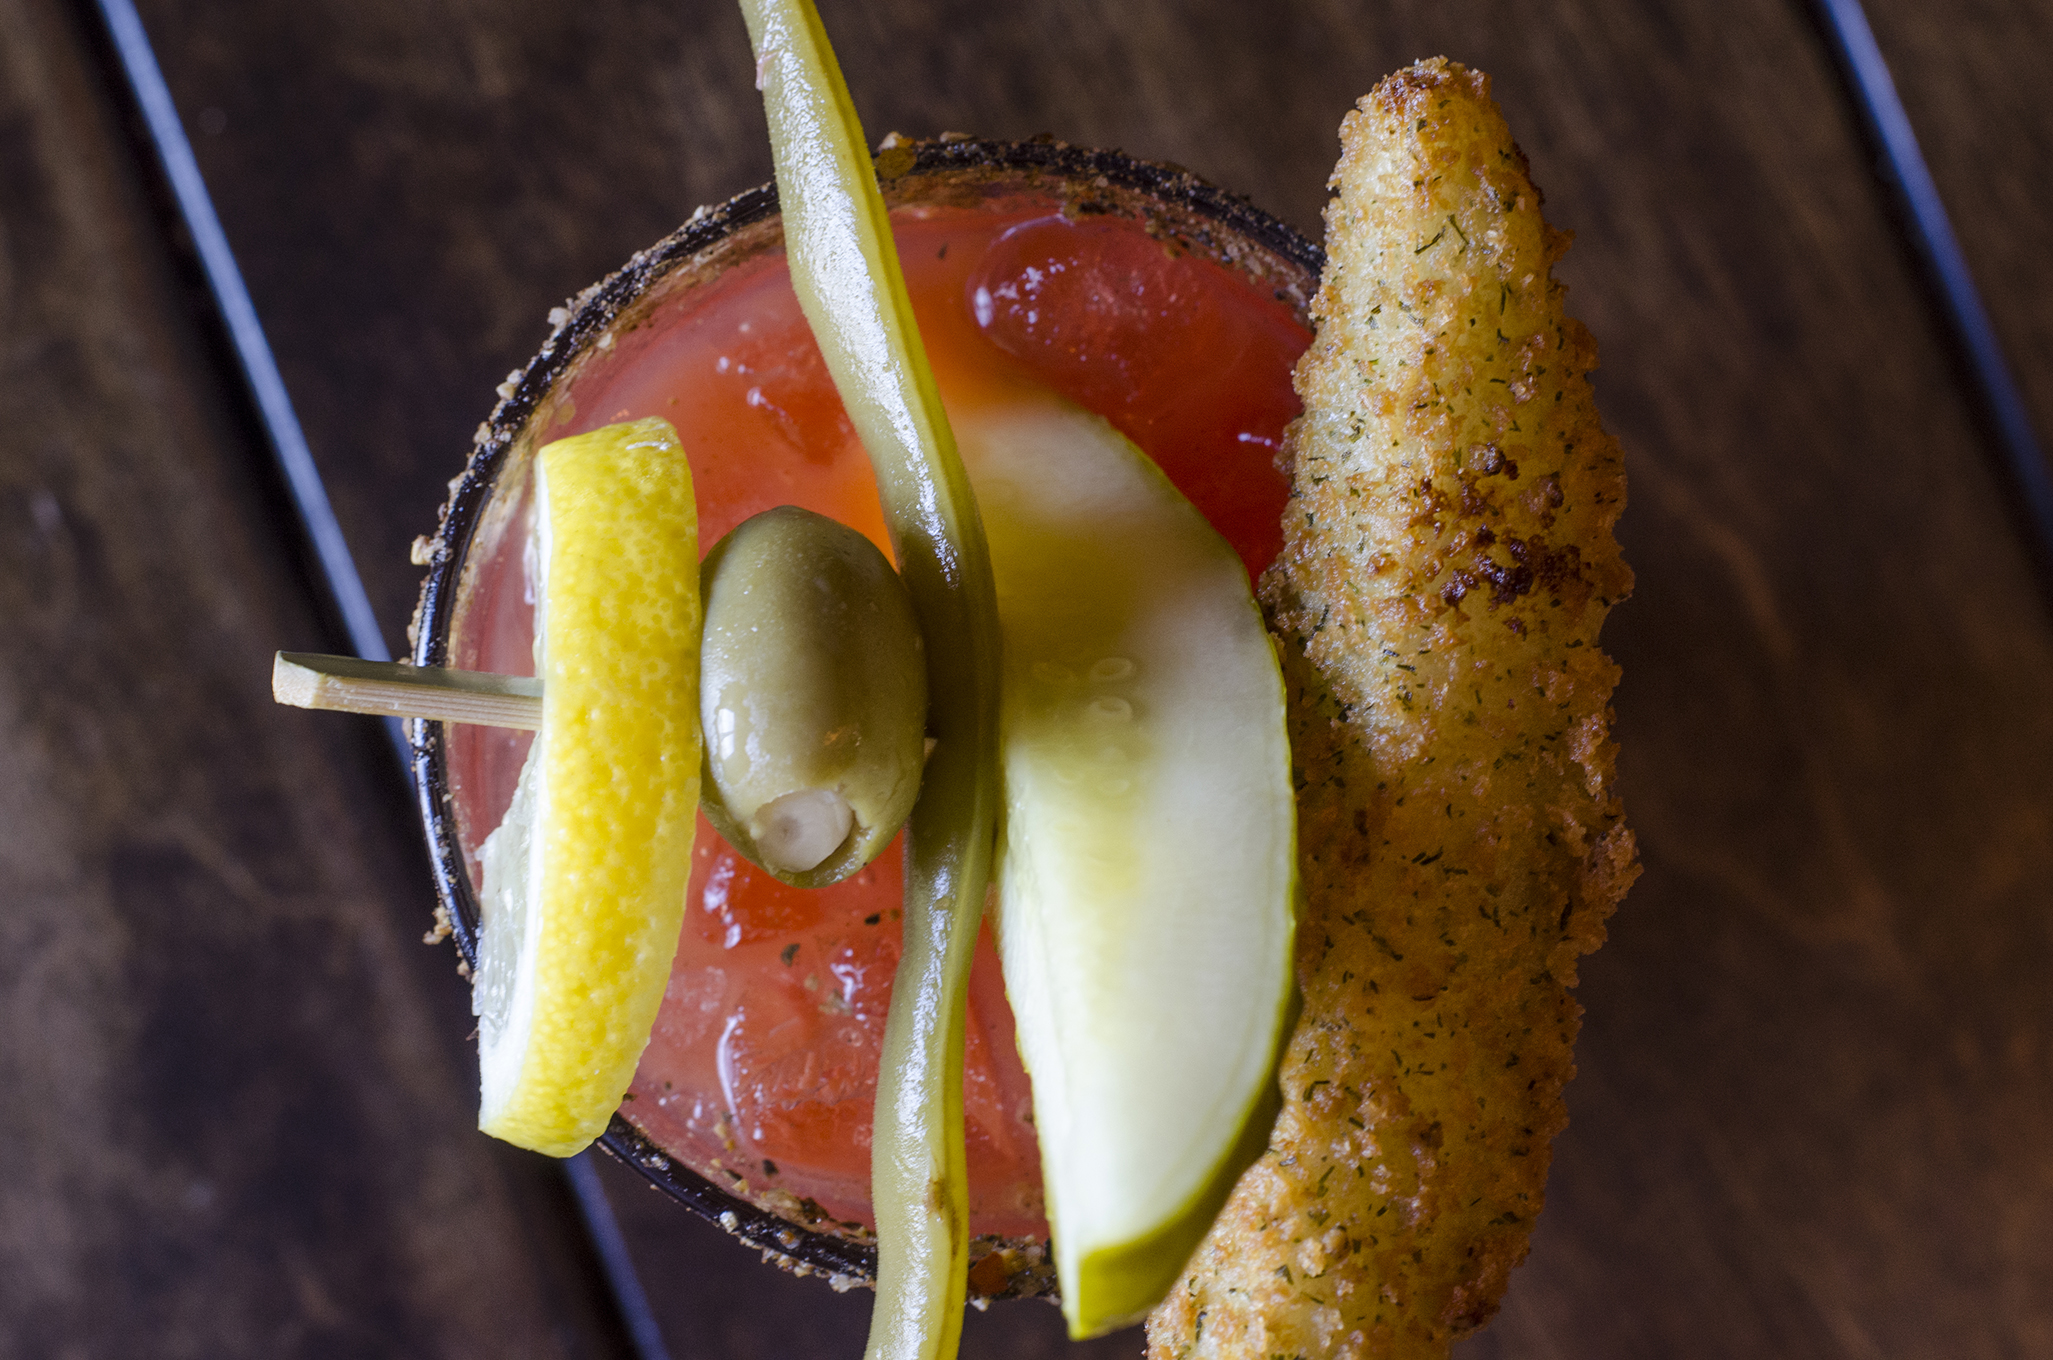 The Pickle Me Elmo Caesar from Walkerville Eatery in Windsor, Ontario.